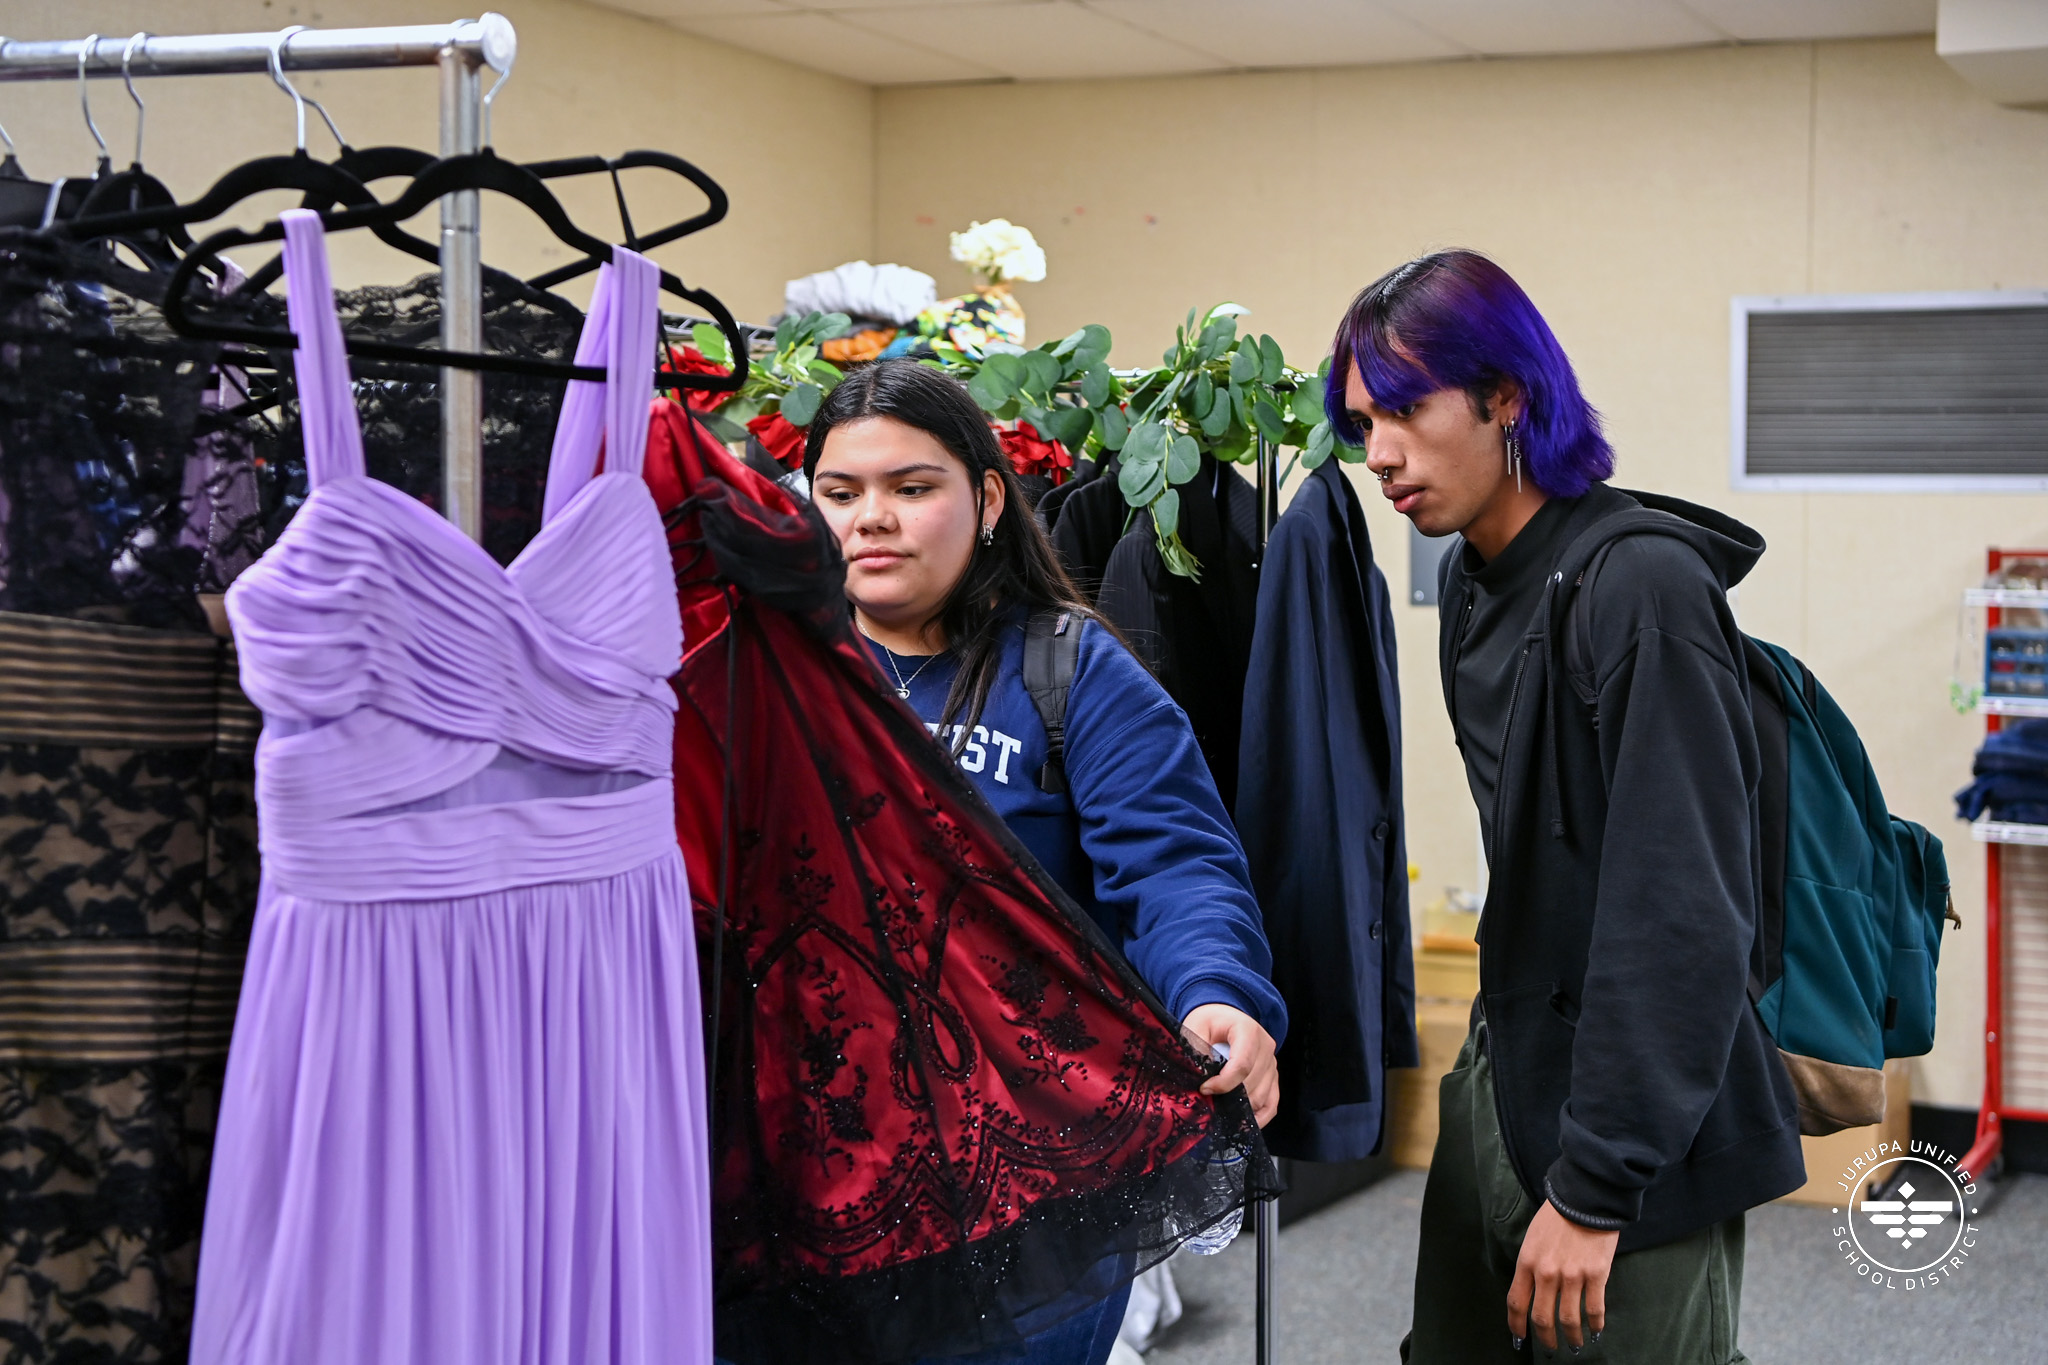 JVHS students shopping the prom closet